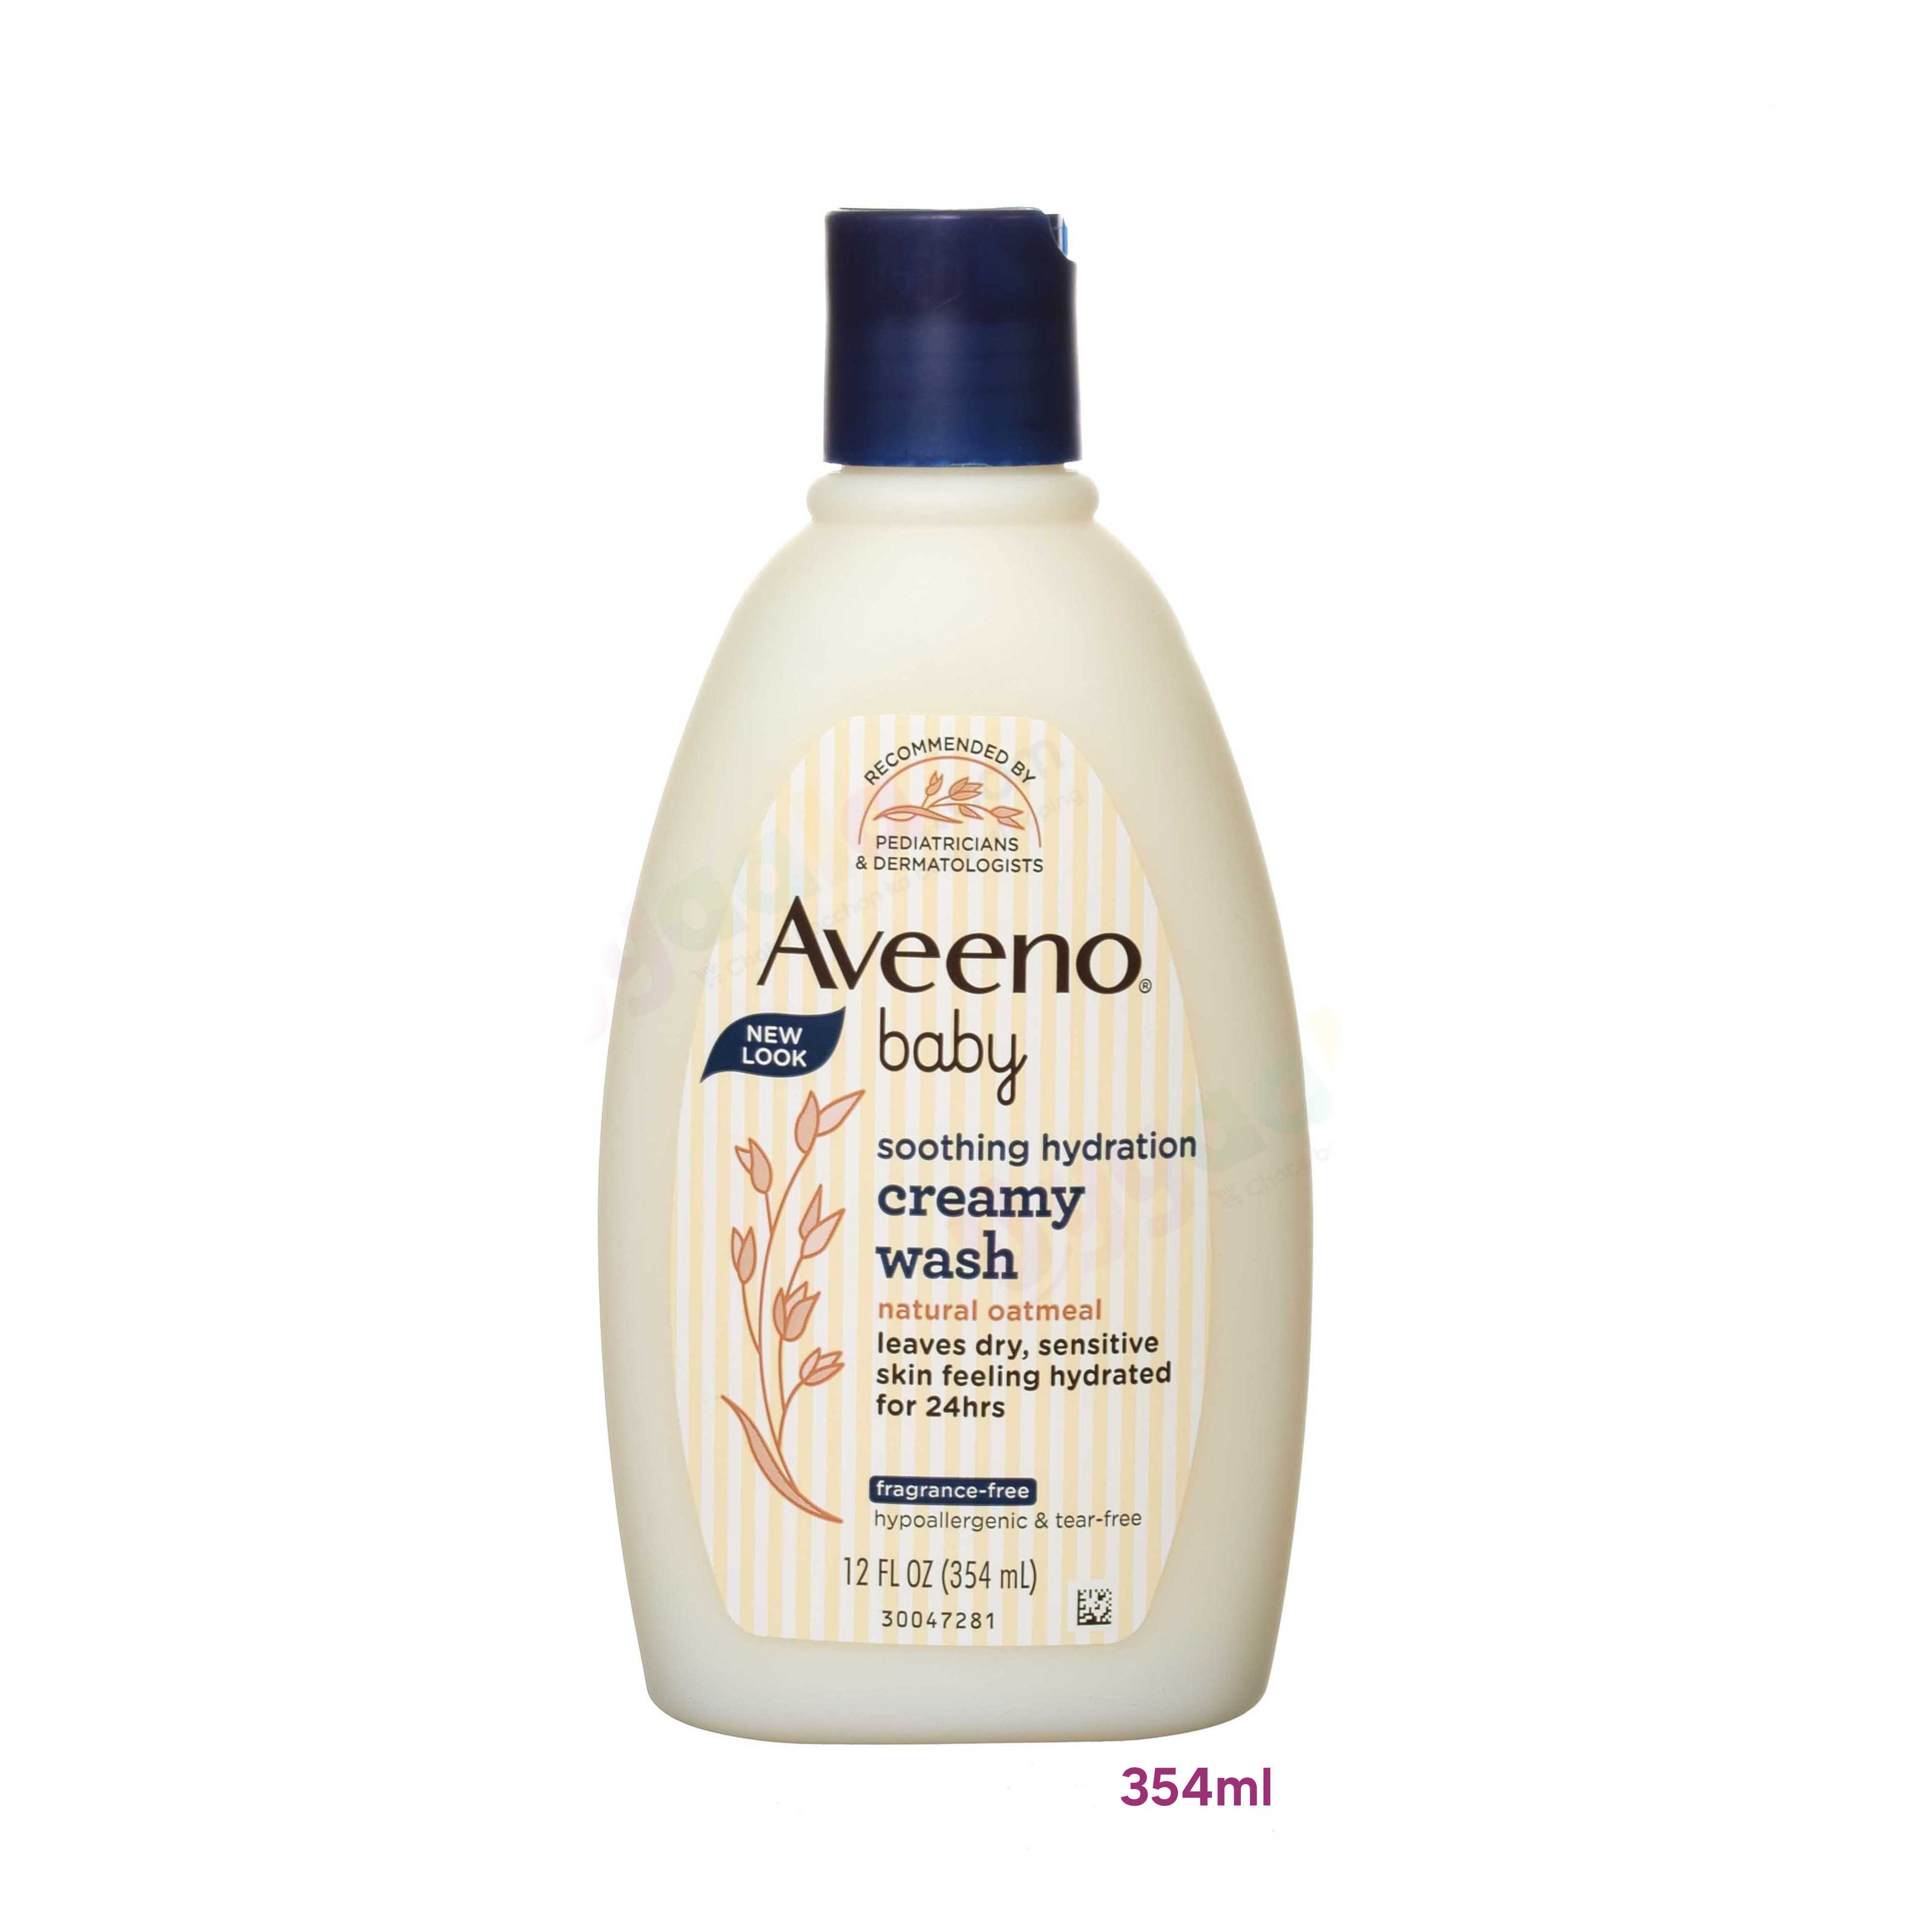 AVEENO BABY Creamy wash soothing hydration, natural oatmeal - 354 ml